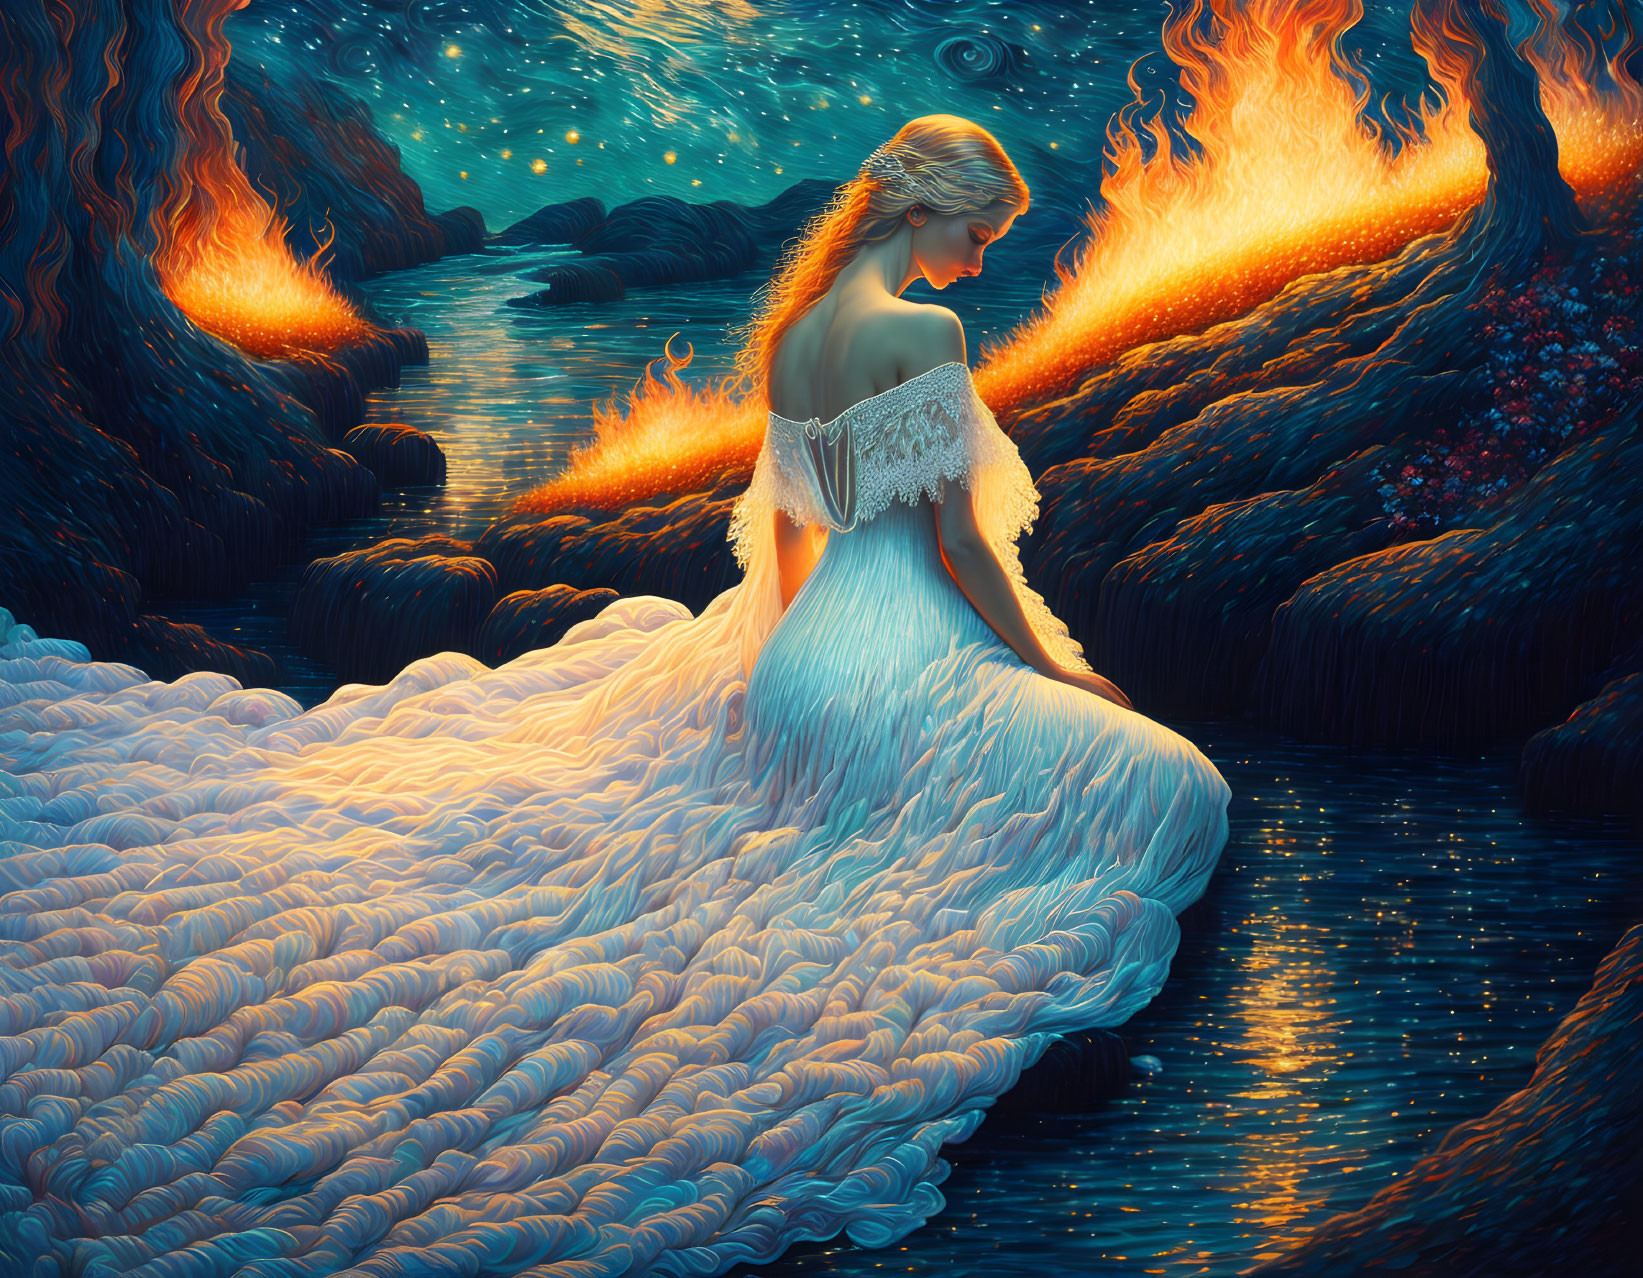 Woman in White at the River of Fire